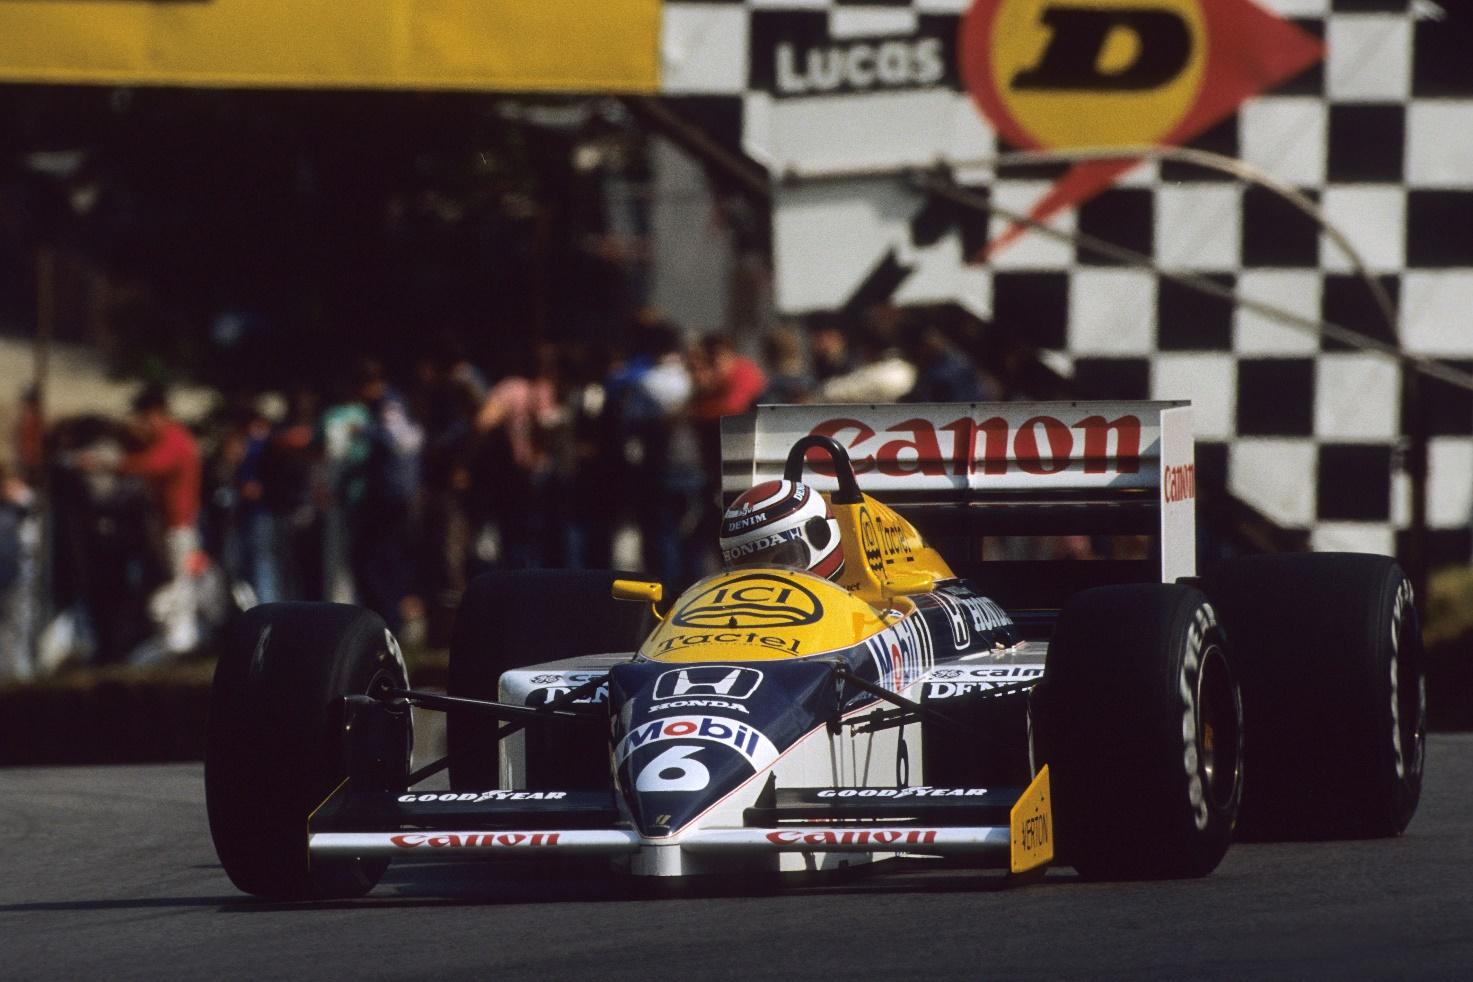 Nelson Piquet in a Williams.